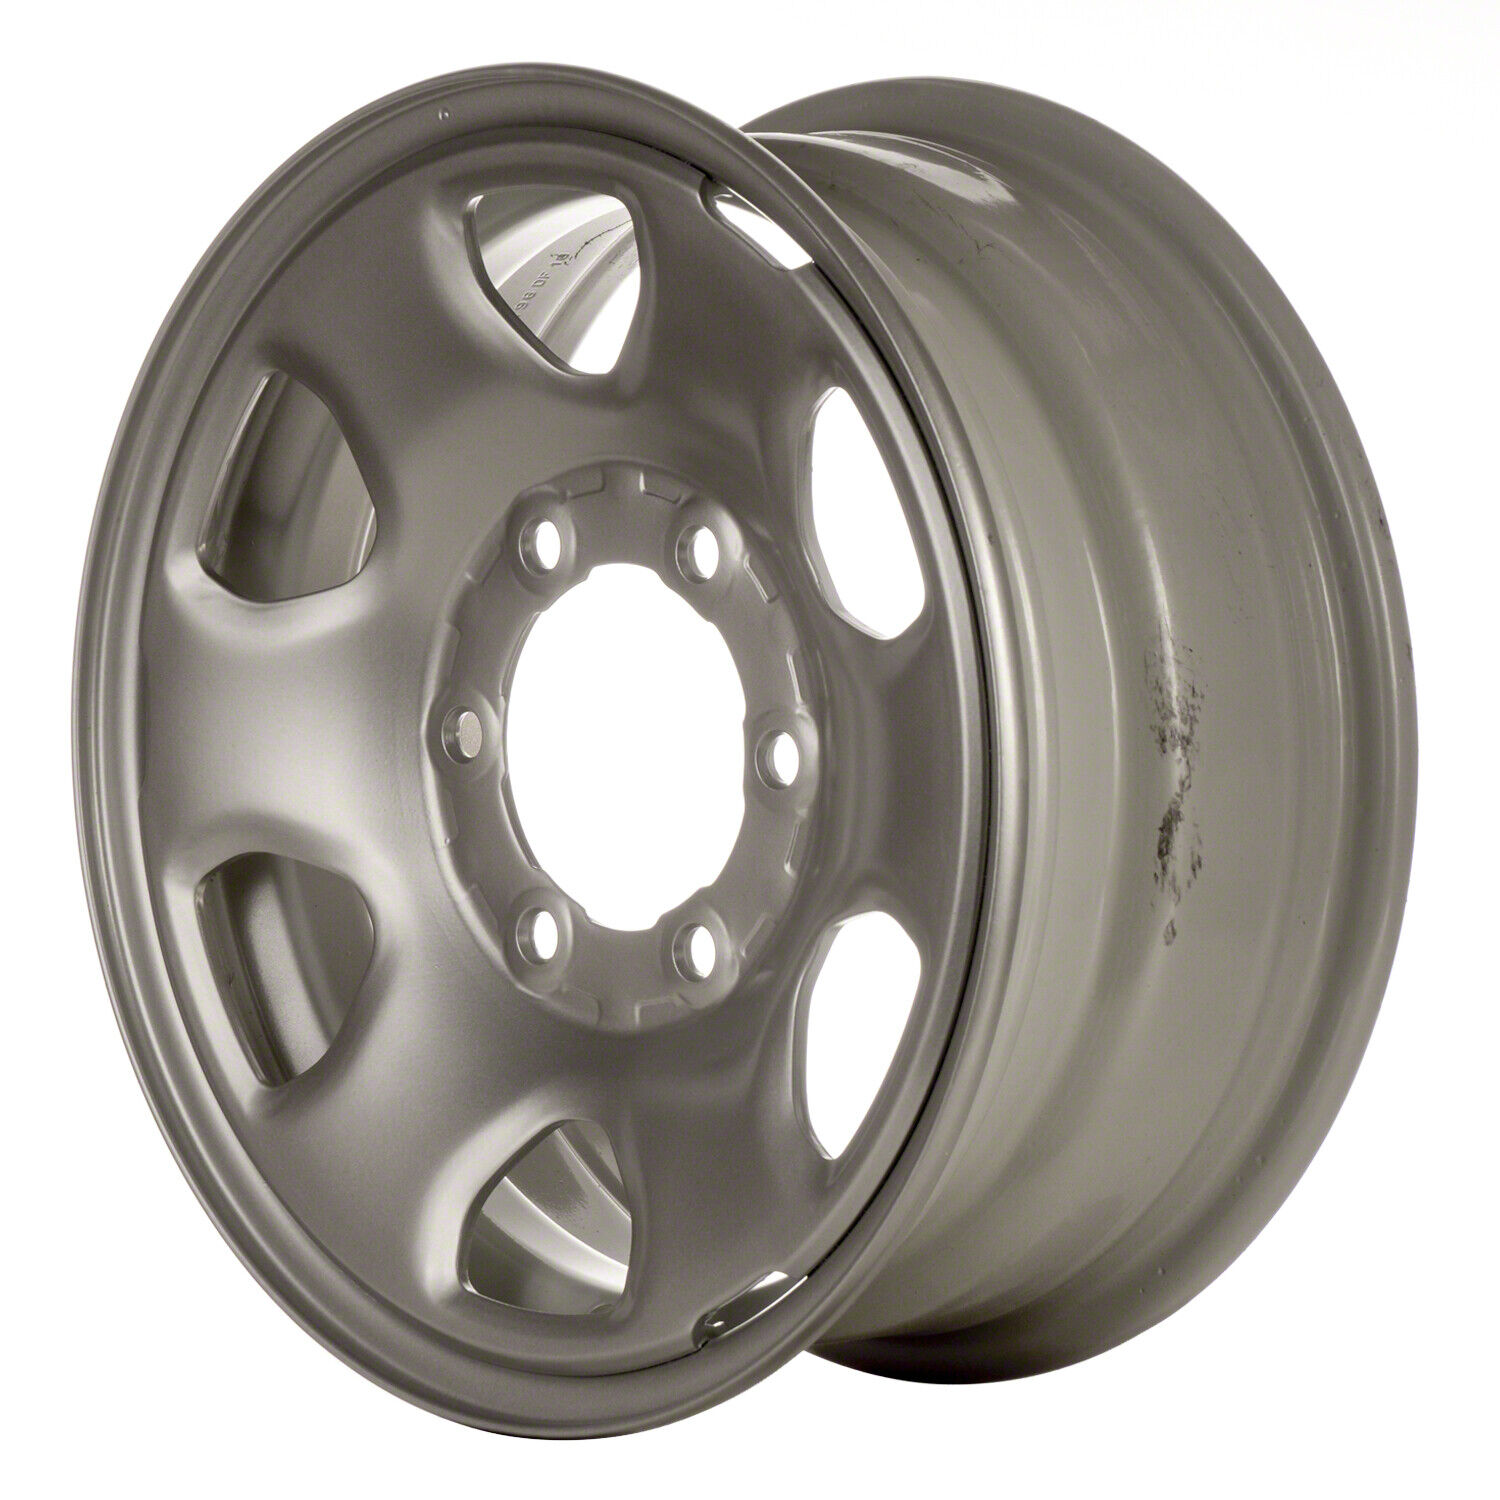 Refurbished 15x6 Painted Silver Wheel fits 1995-2000 Toyota Tacoma Pickup 4Wd